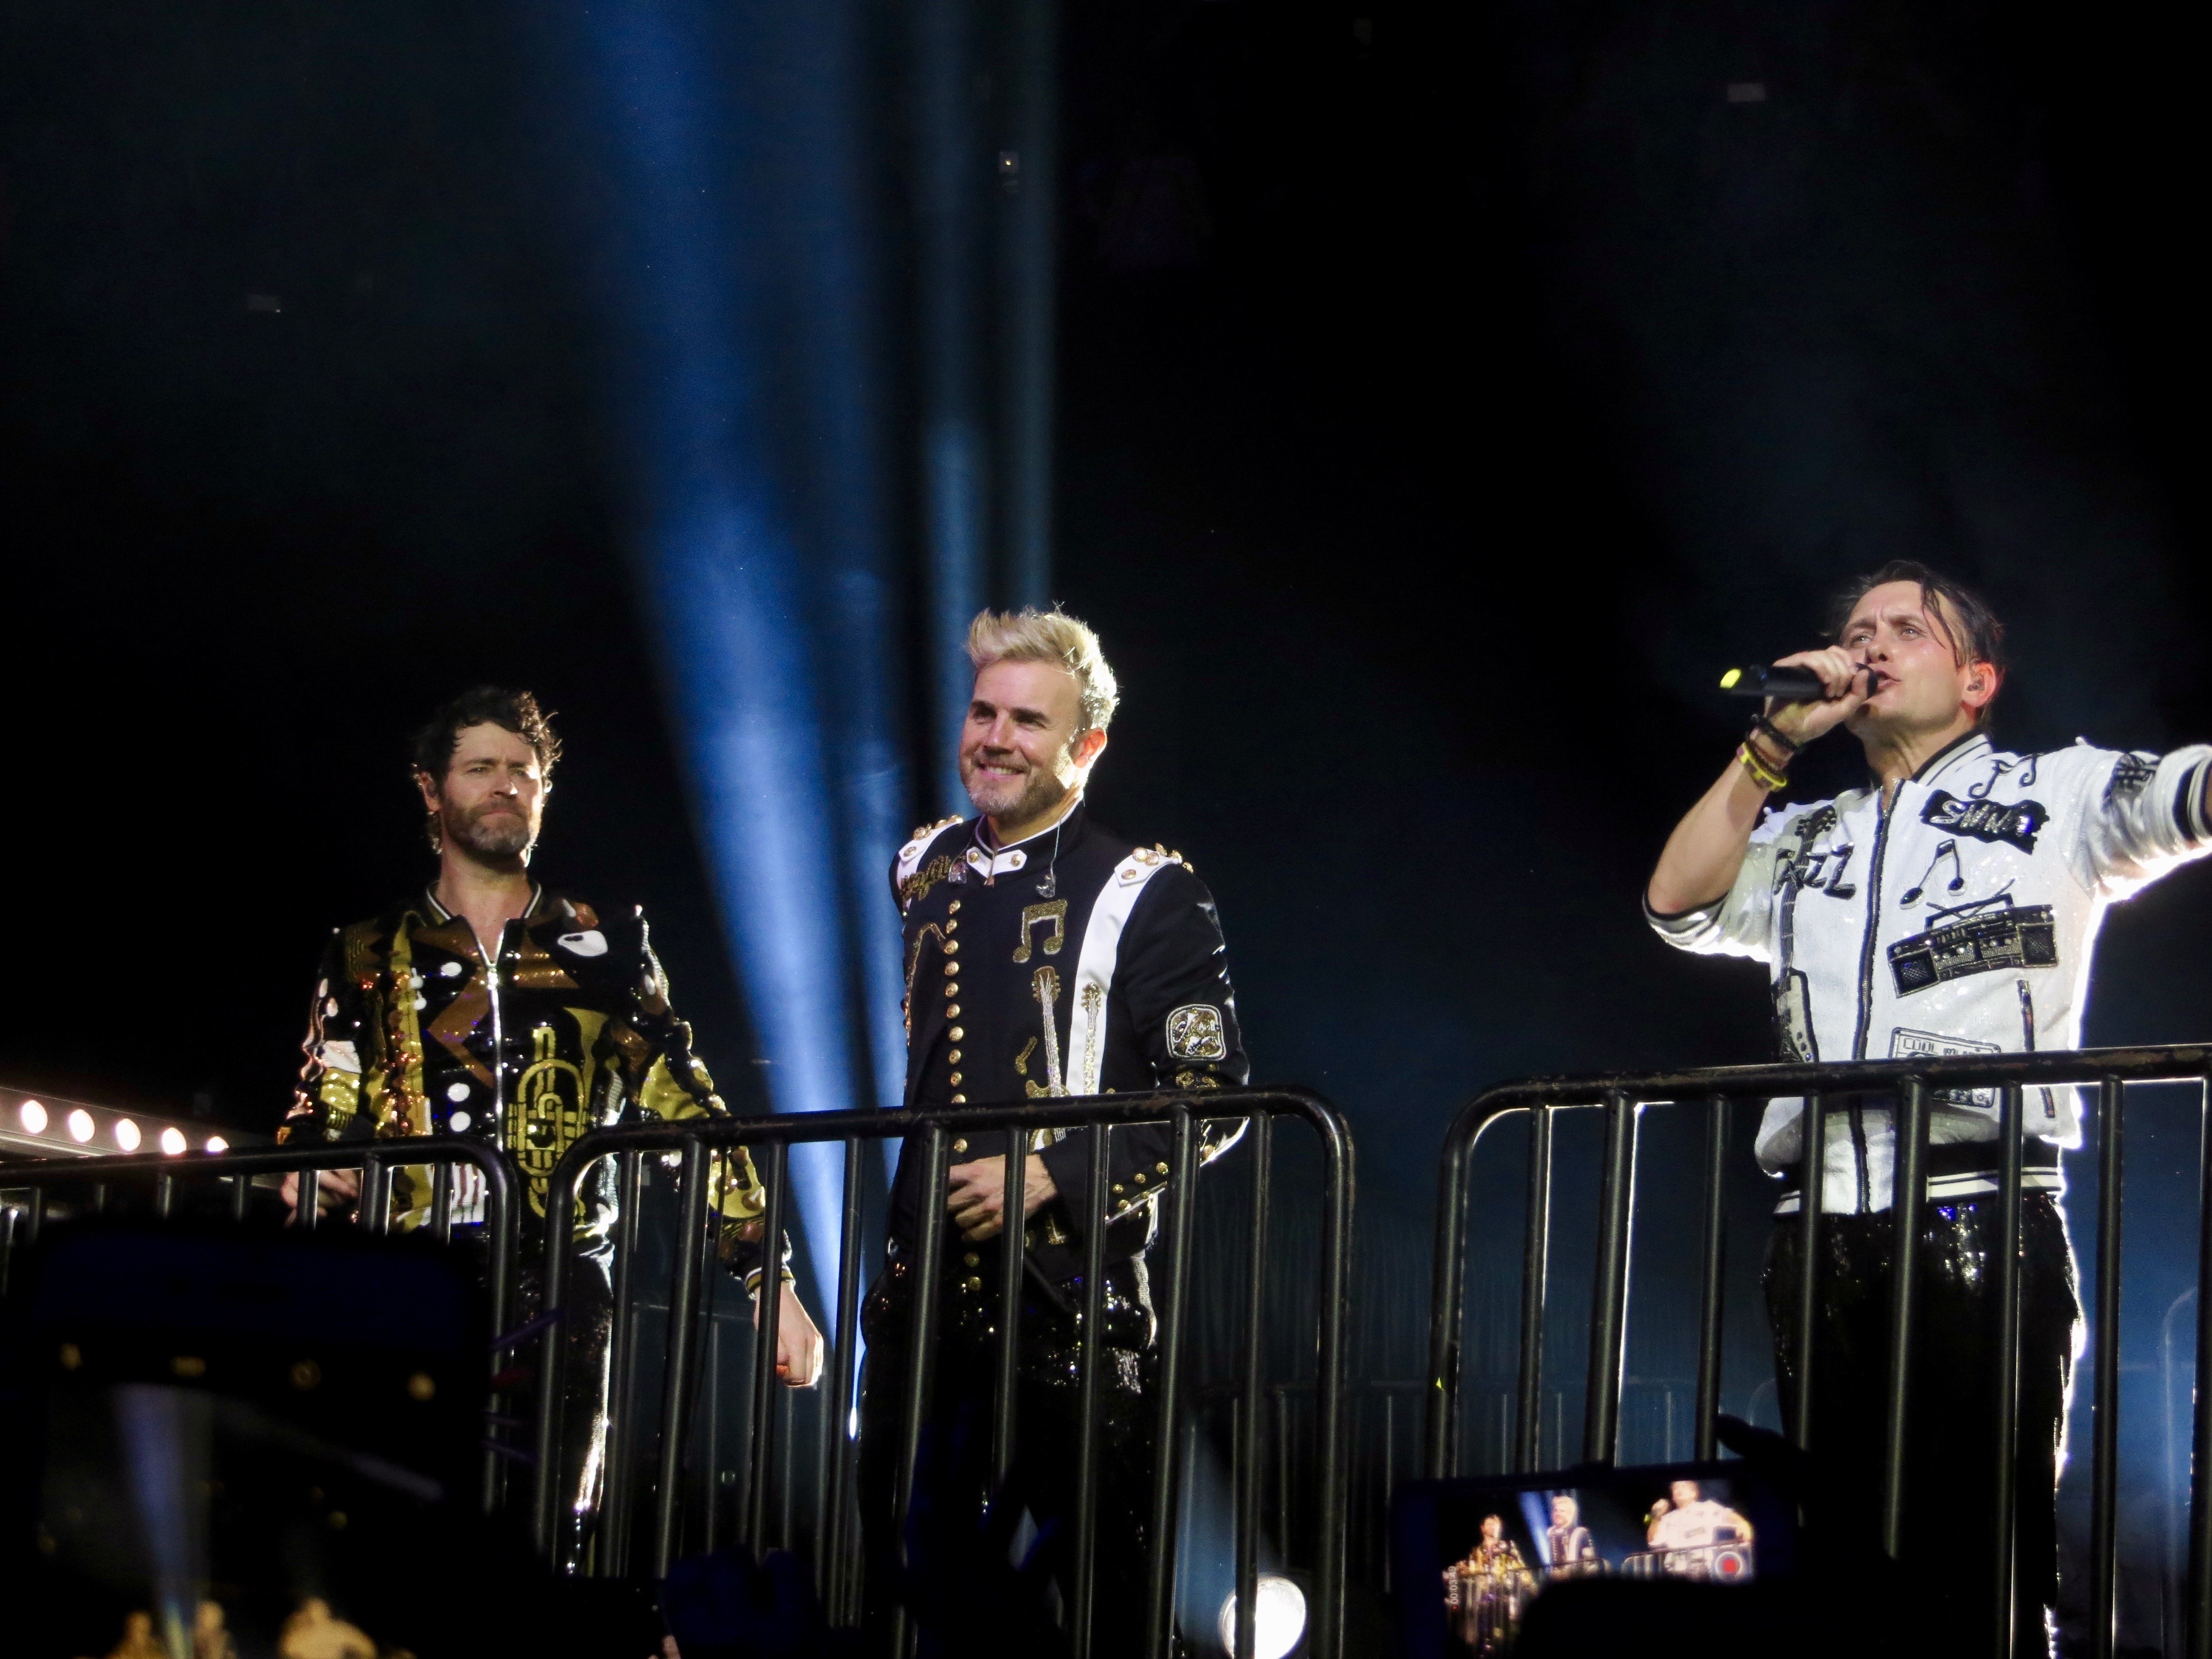 The current line up of Take That (L to R: Donald, Barlow and Owen) performing in Glasgow, Scotland in 2017